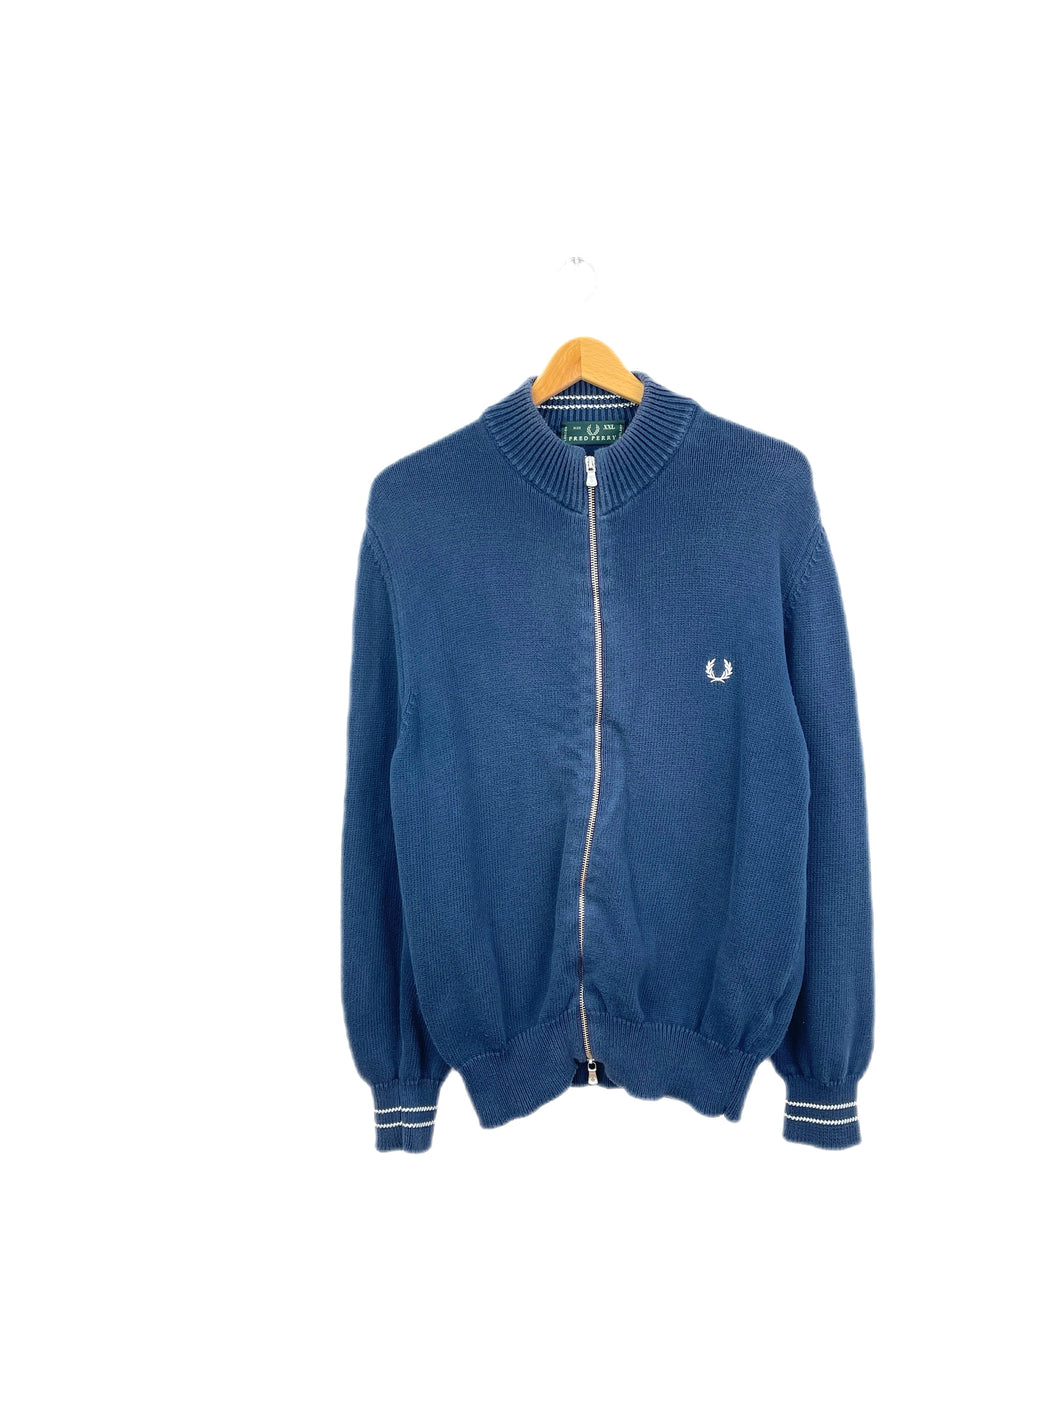 Fred Perry Knitted Jacket - Large